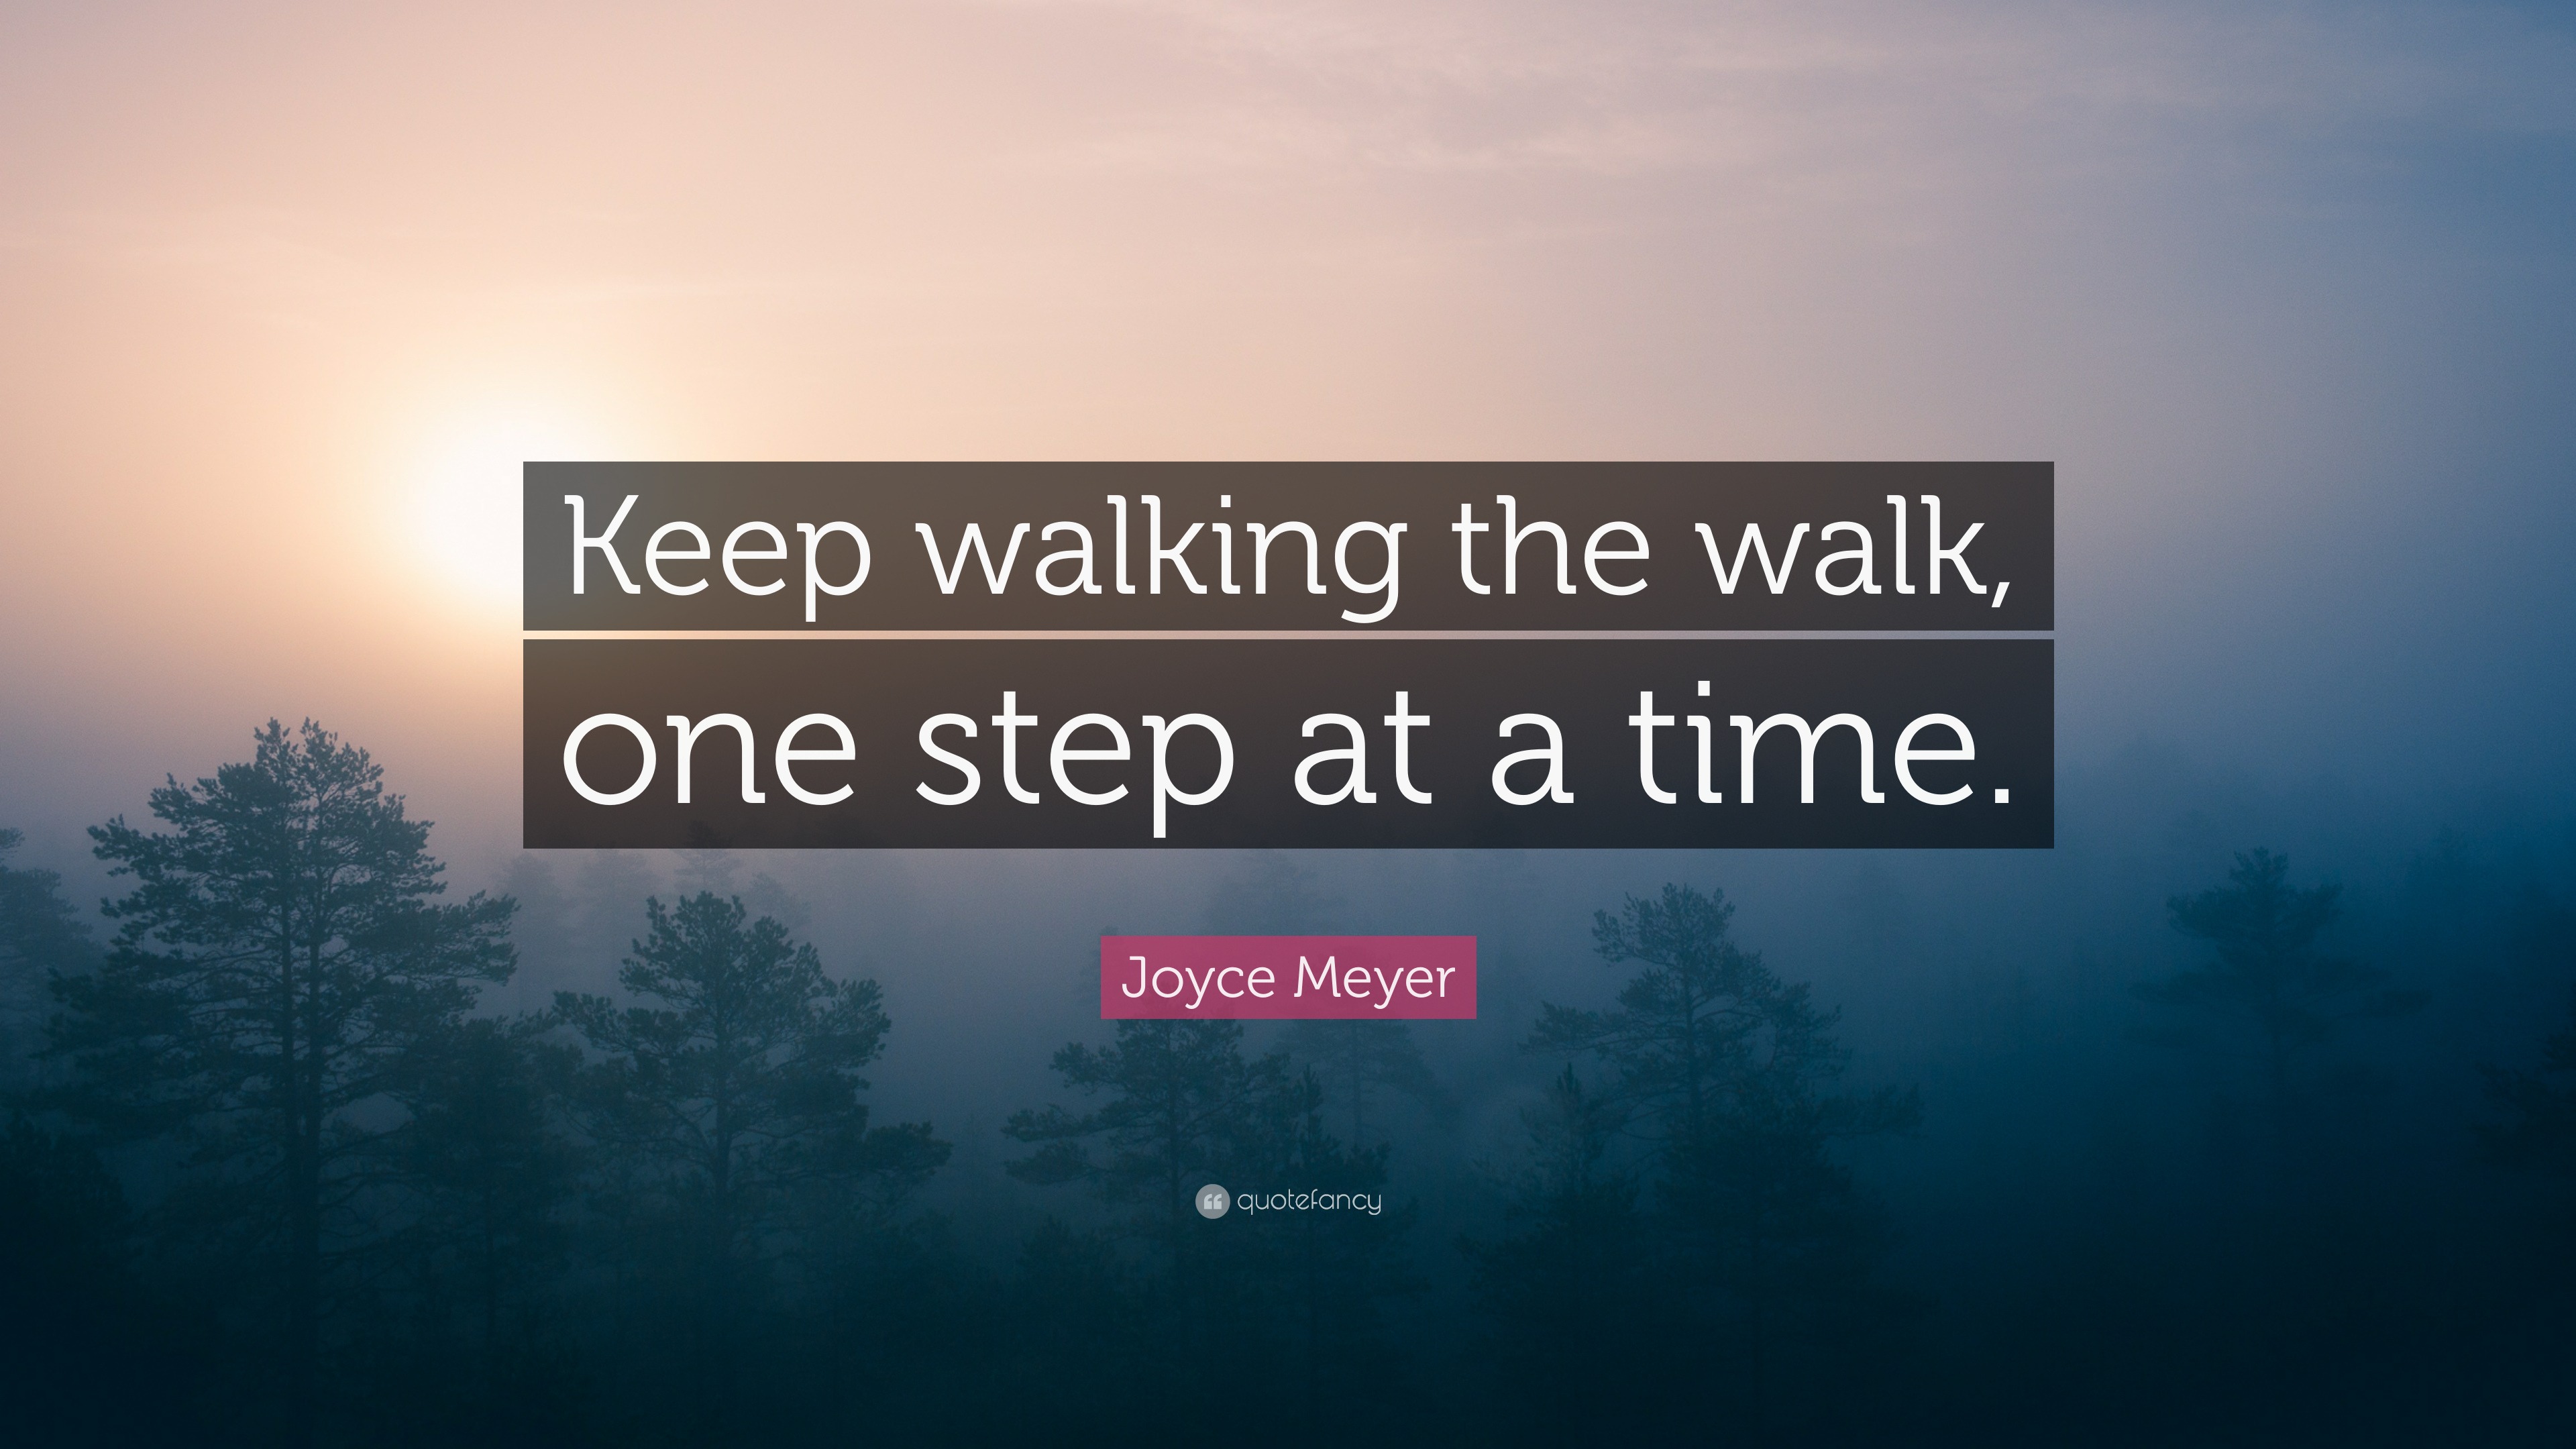 Joyce Meyer Quote: “Keep walking the walk, one step at a time.”